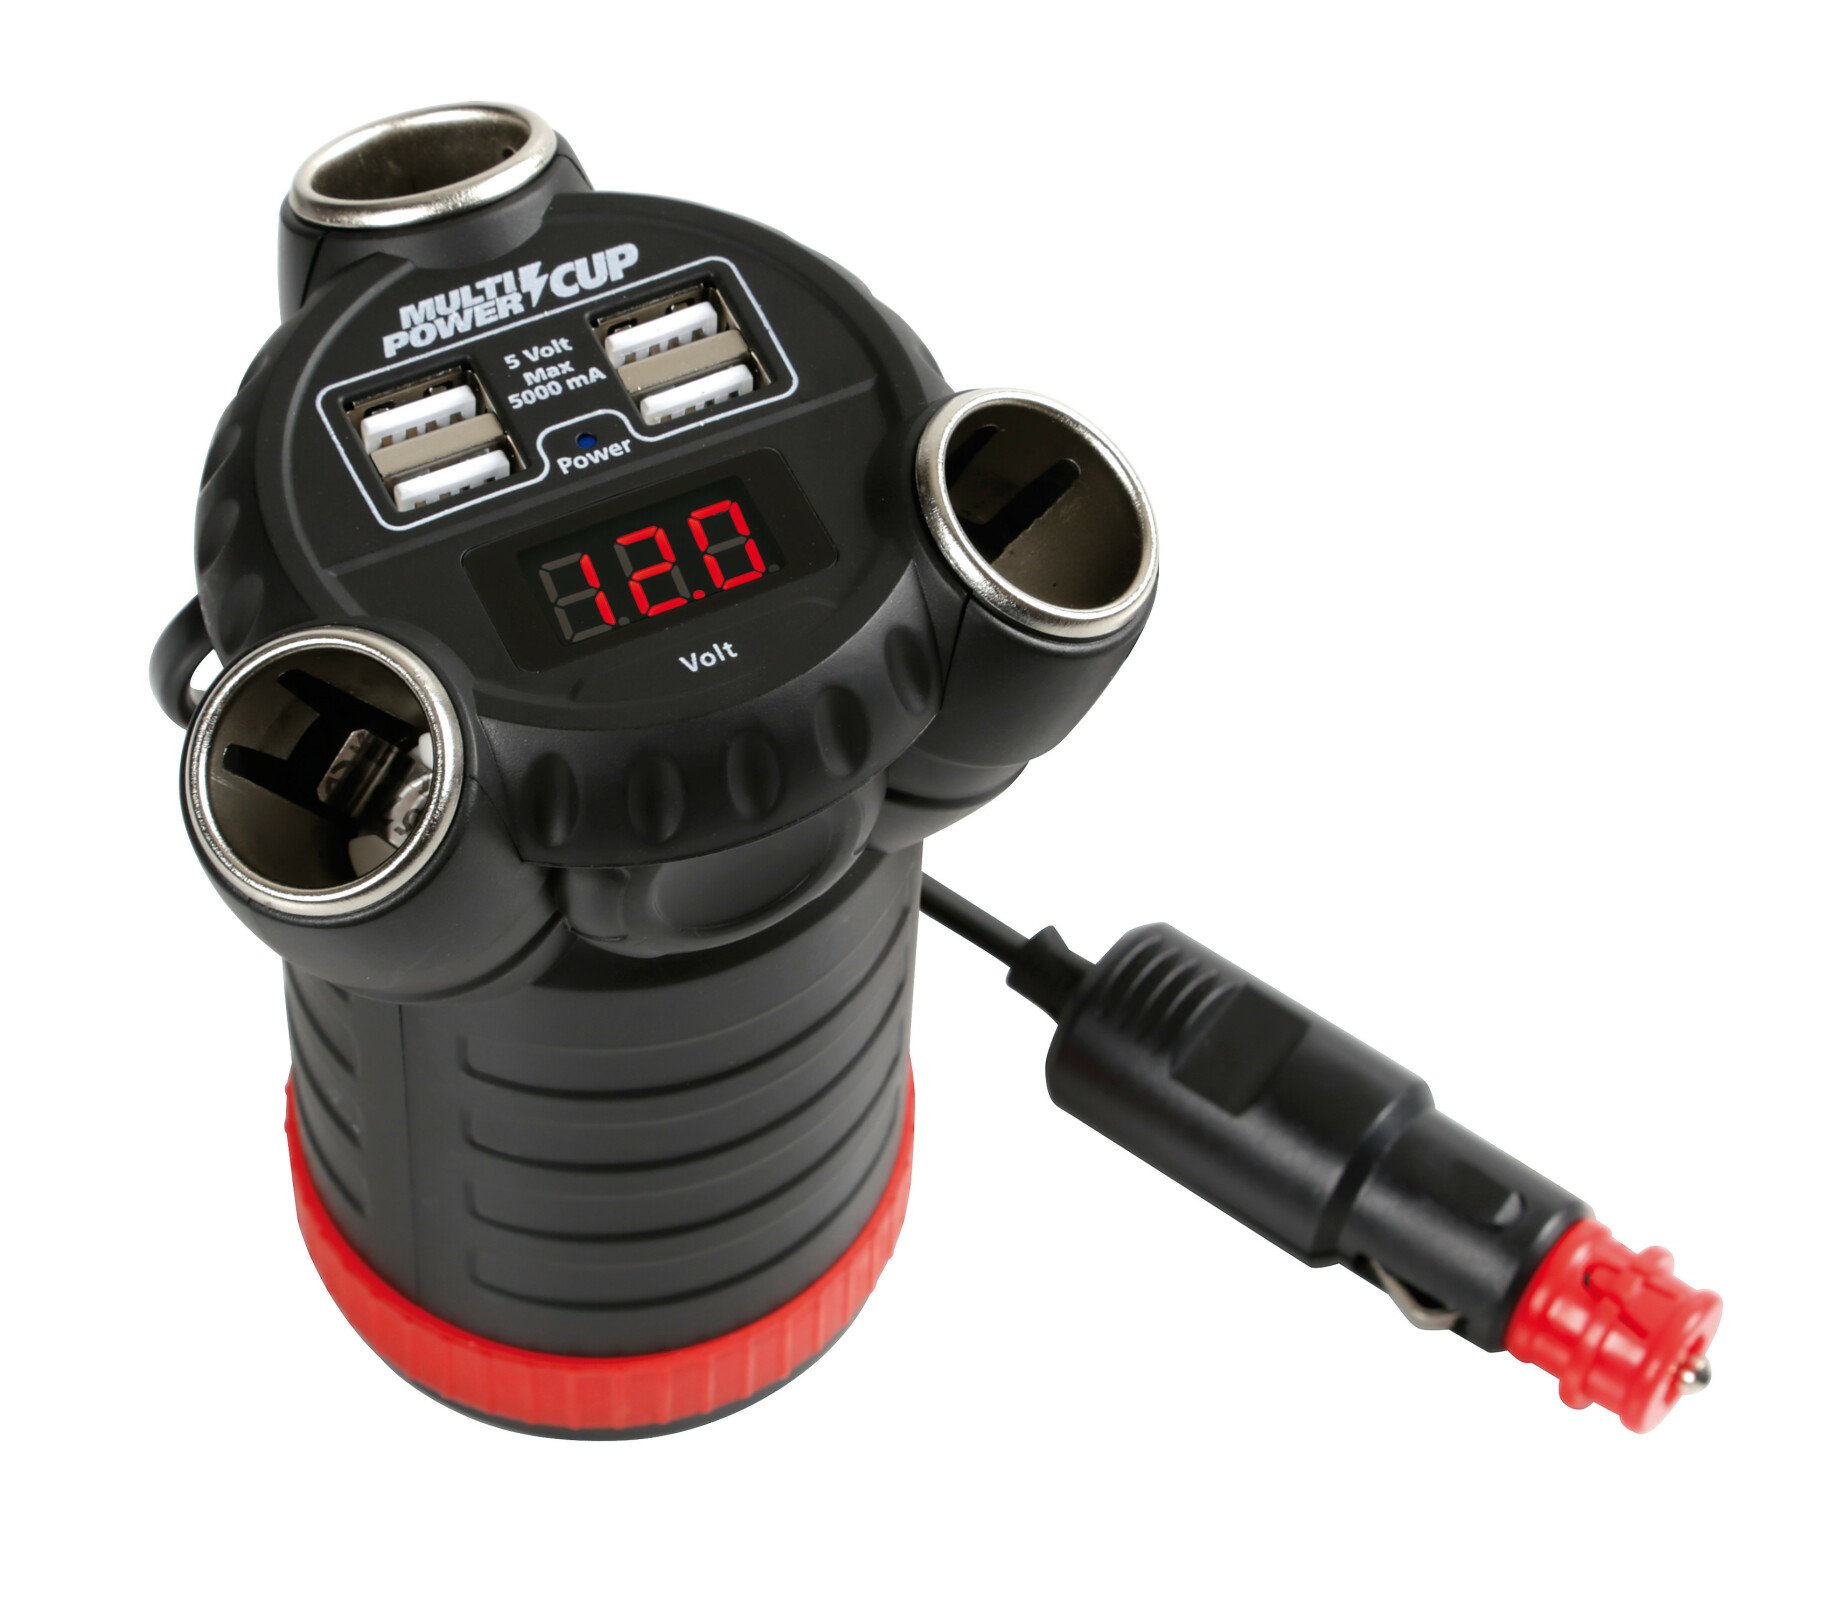 Multi-Power Cup, 3 sockets + 4 USB and voltmeter, 12/24/36V thumb